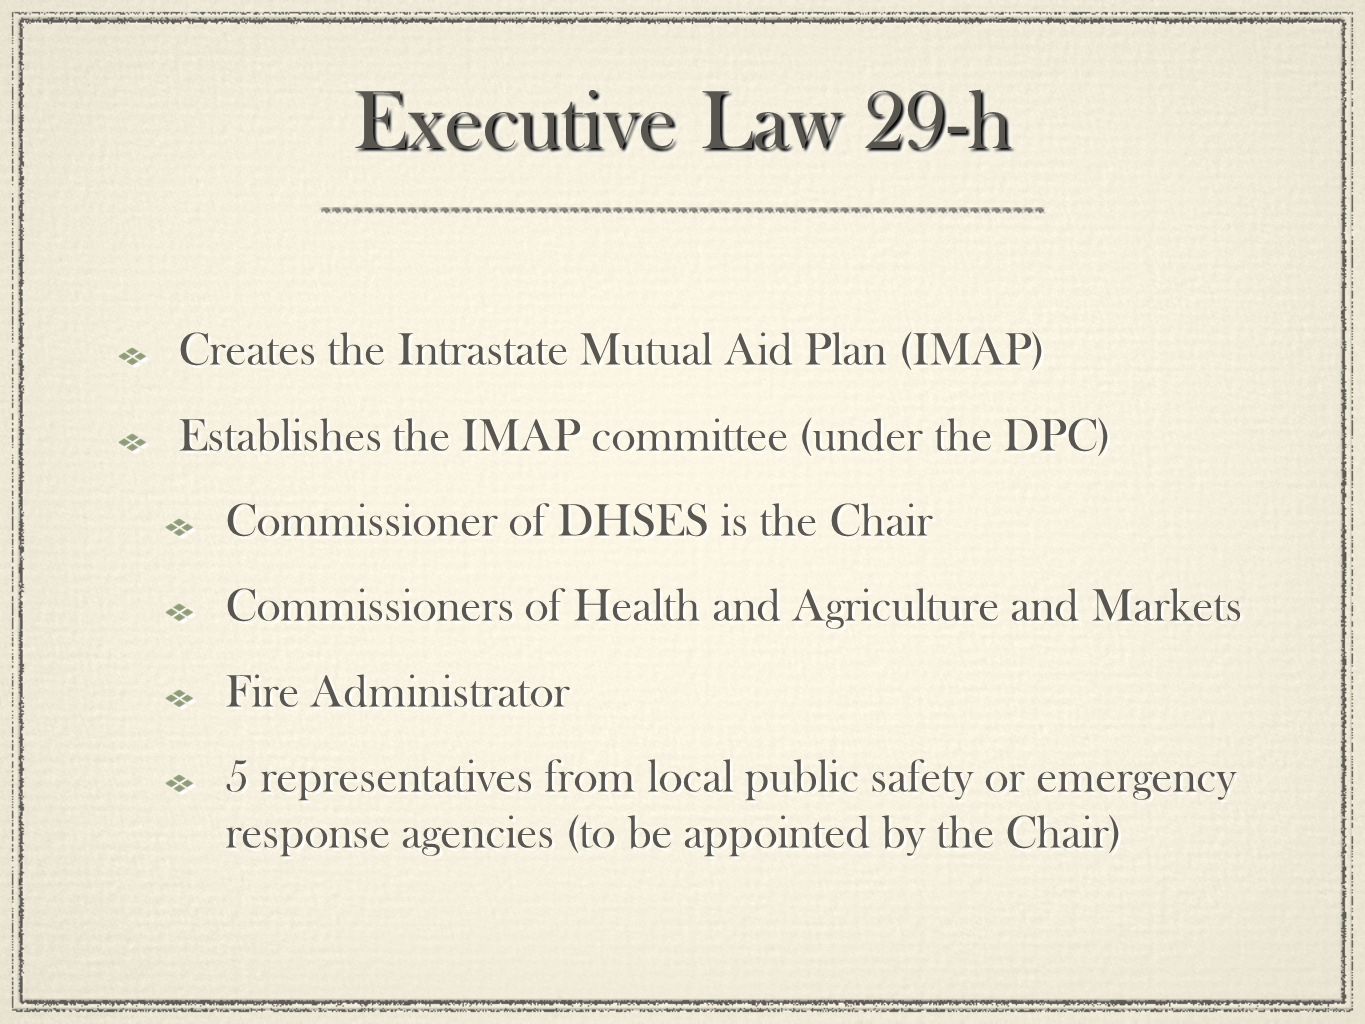 Executive Law 29-h Creates the Intrastate Mutual Aid Plan (IMAP) Establishes the IMAP committee (under the DPC) Commissioner of DHSES is the Chair Commissioners of Health and Agriculture and Markets Fire Administrator 5 representatives from local public safety or emergency response agencies (to be appointed by the Chair) Creates the Intrastate Mutual Aid Plan (IMAP) Establishes the IMAP committee (under the DPC) Commissioner of DHSES is the Chair Commissioners of Health and Agriculture and Markets Fire Administrator 5 representatives from local public safety or emergency response agencies (to be appointed by the Chair)